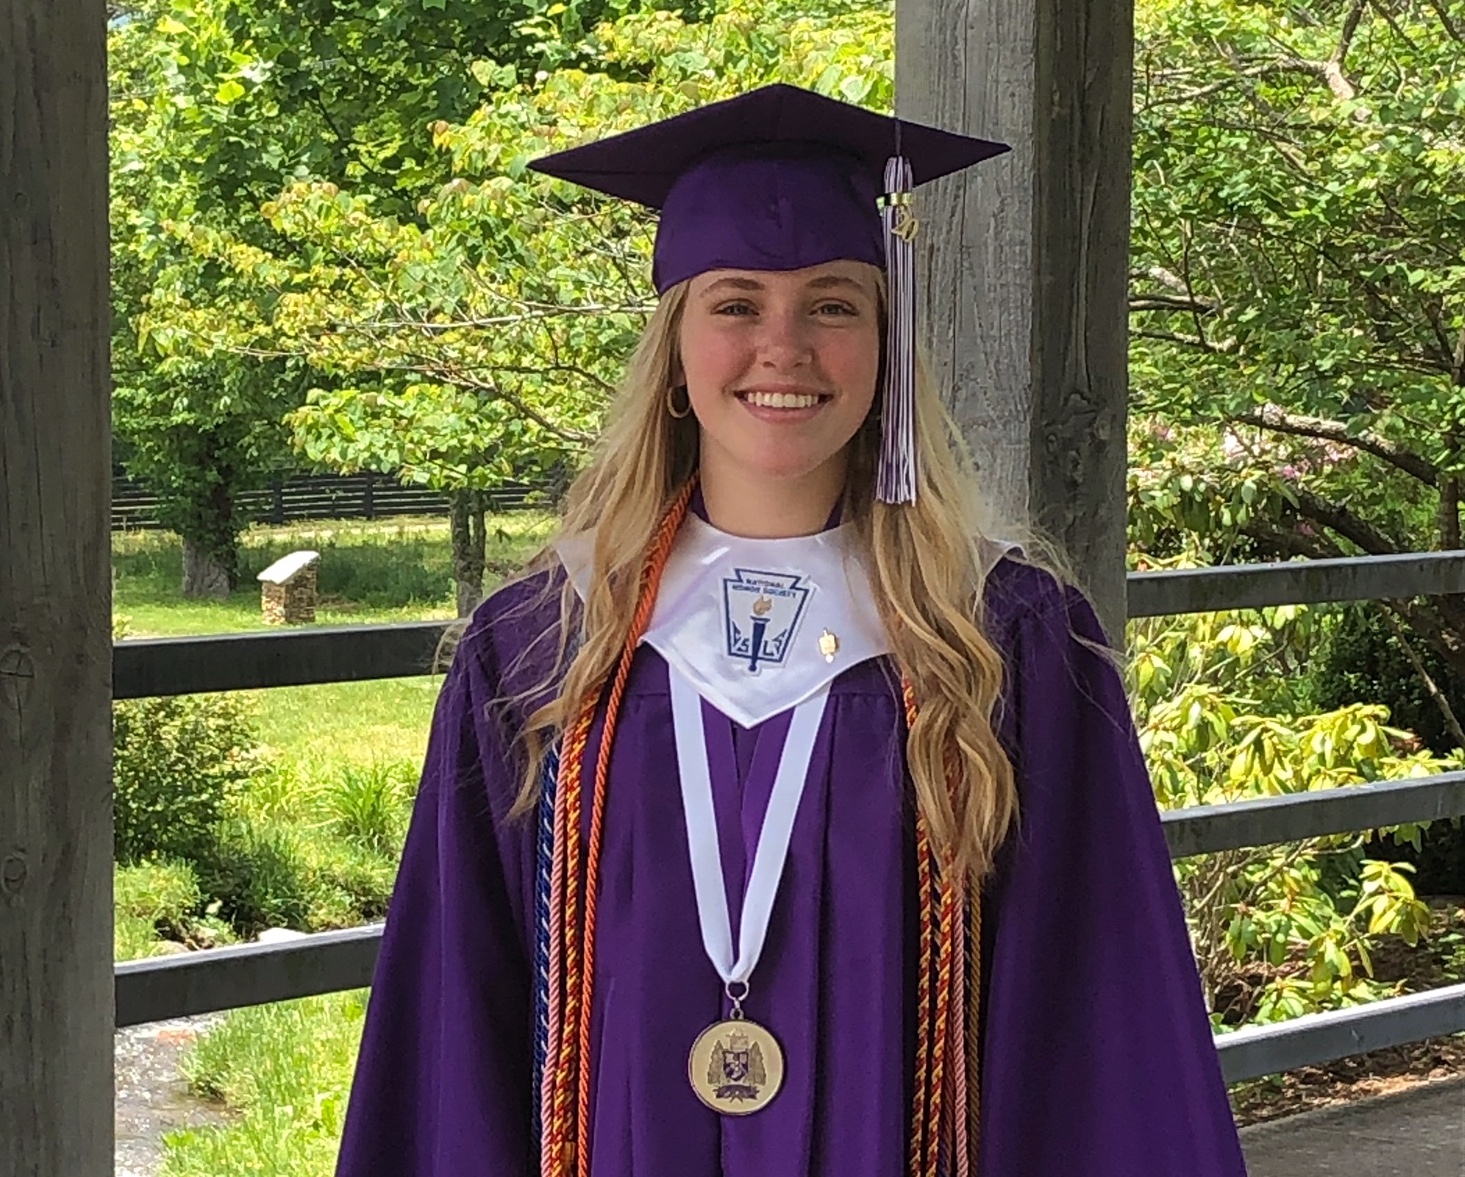 Caroline Atkins is the daughter of Jeff and Angela Atkins of Spruce Pine. She plans to attend East Tennessee State University in the fall of 2020. (Photo Courtesy of Mitchell County Chamber of Commerce)